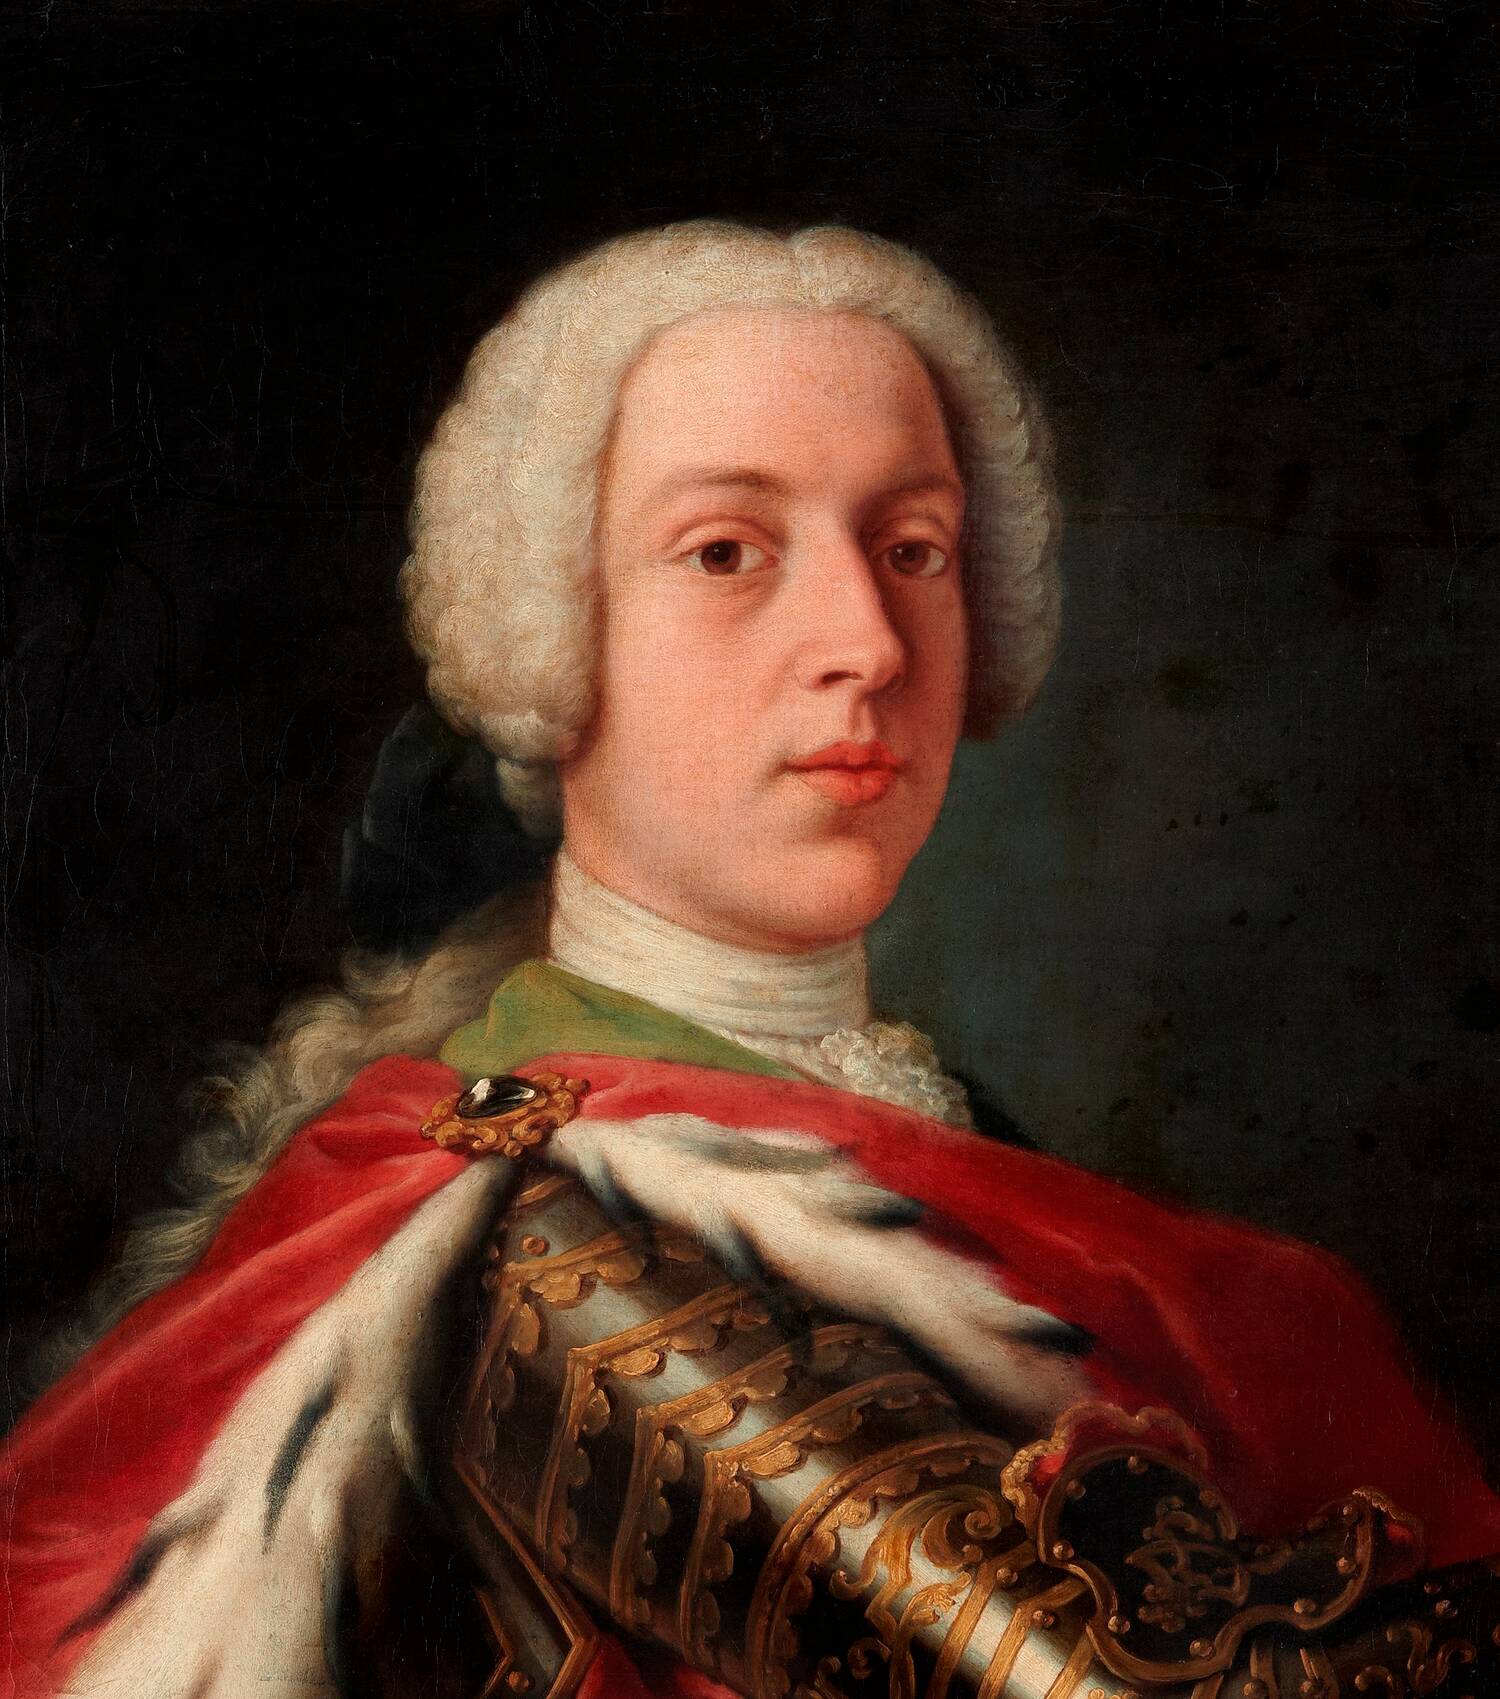 A half-portrait of a young 18th-century prince. He wears a white wig and a rich red cape, lined with fur. He has golden armour on his arm.